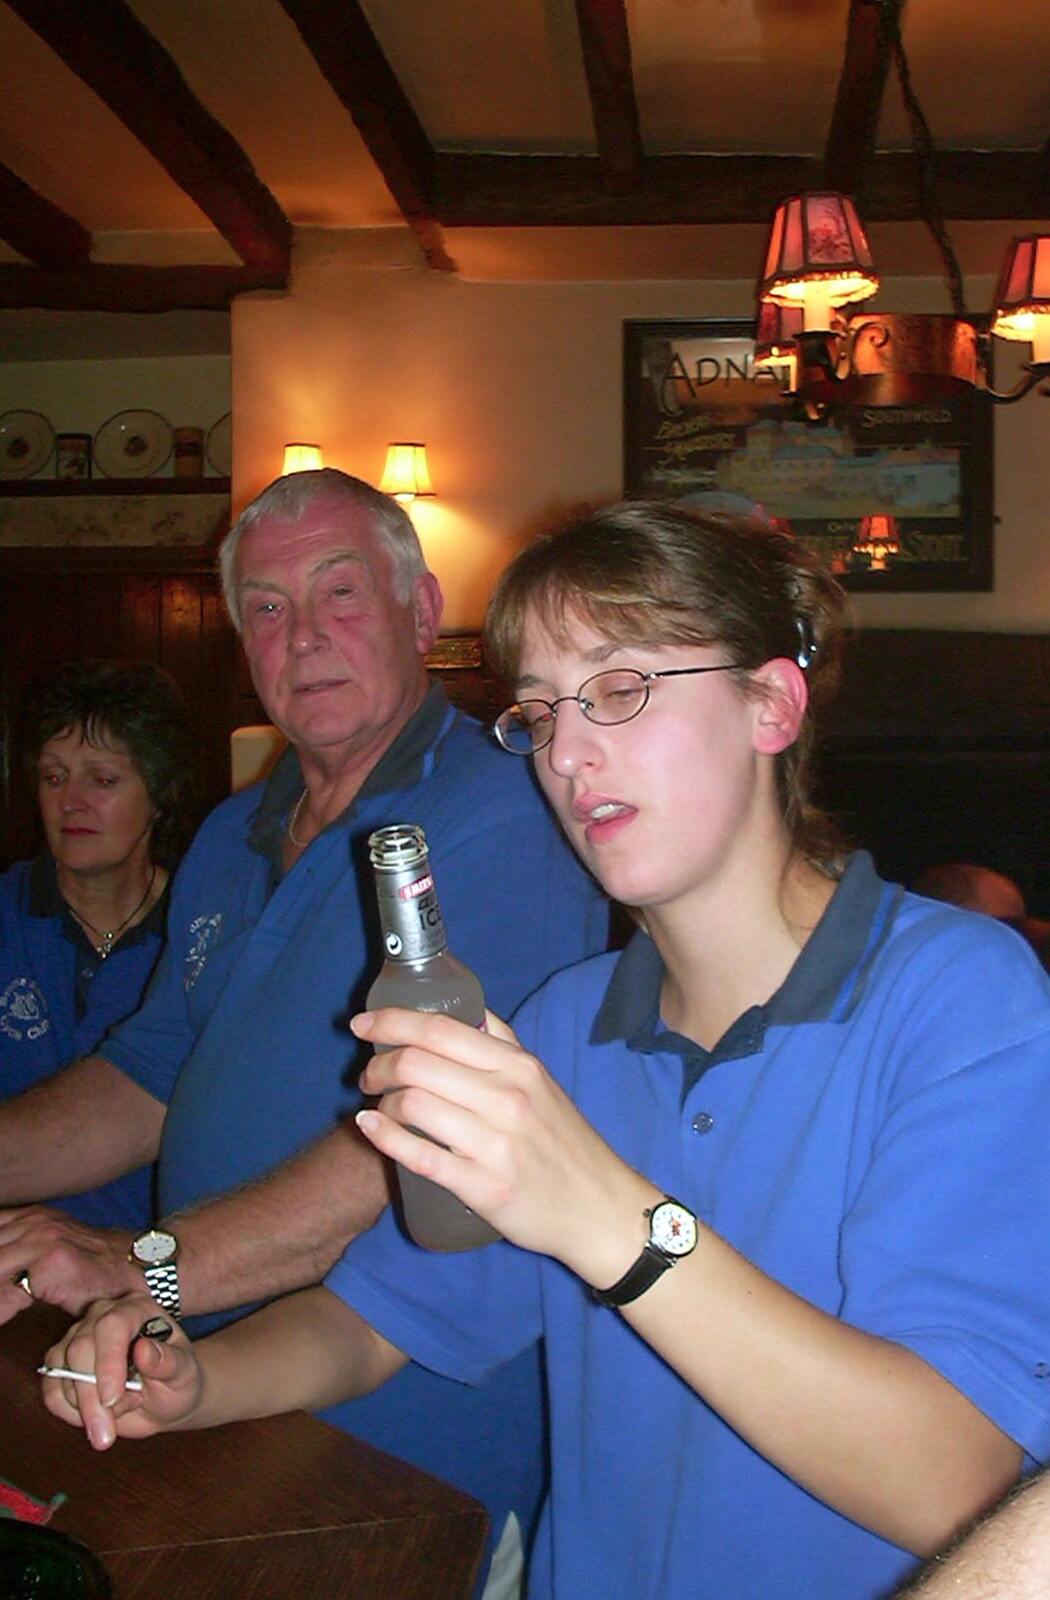 A BSCC Presentation, Brome Swan, Suffolk - 9th November 2002: Suey looks nonplussed by a bottle of Smirnoff Ice